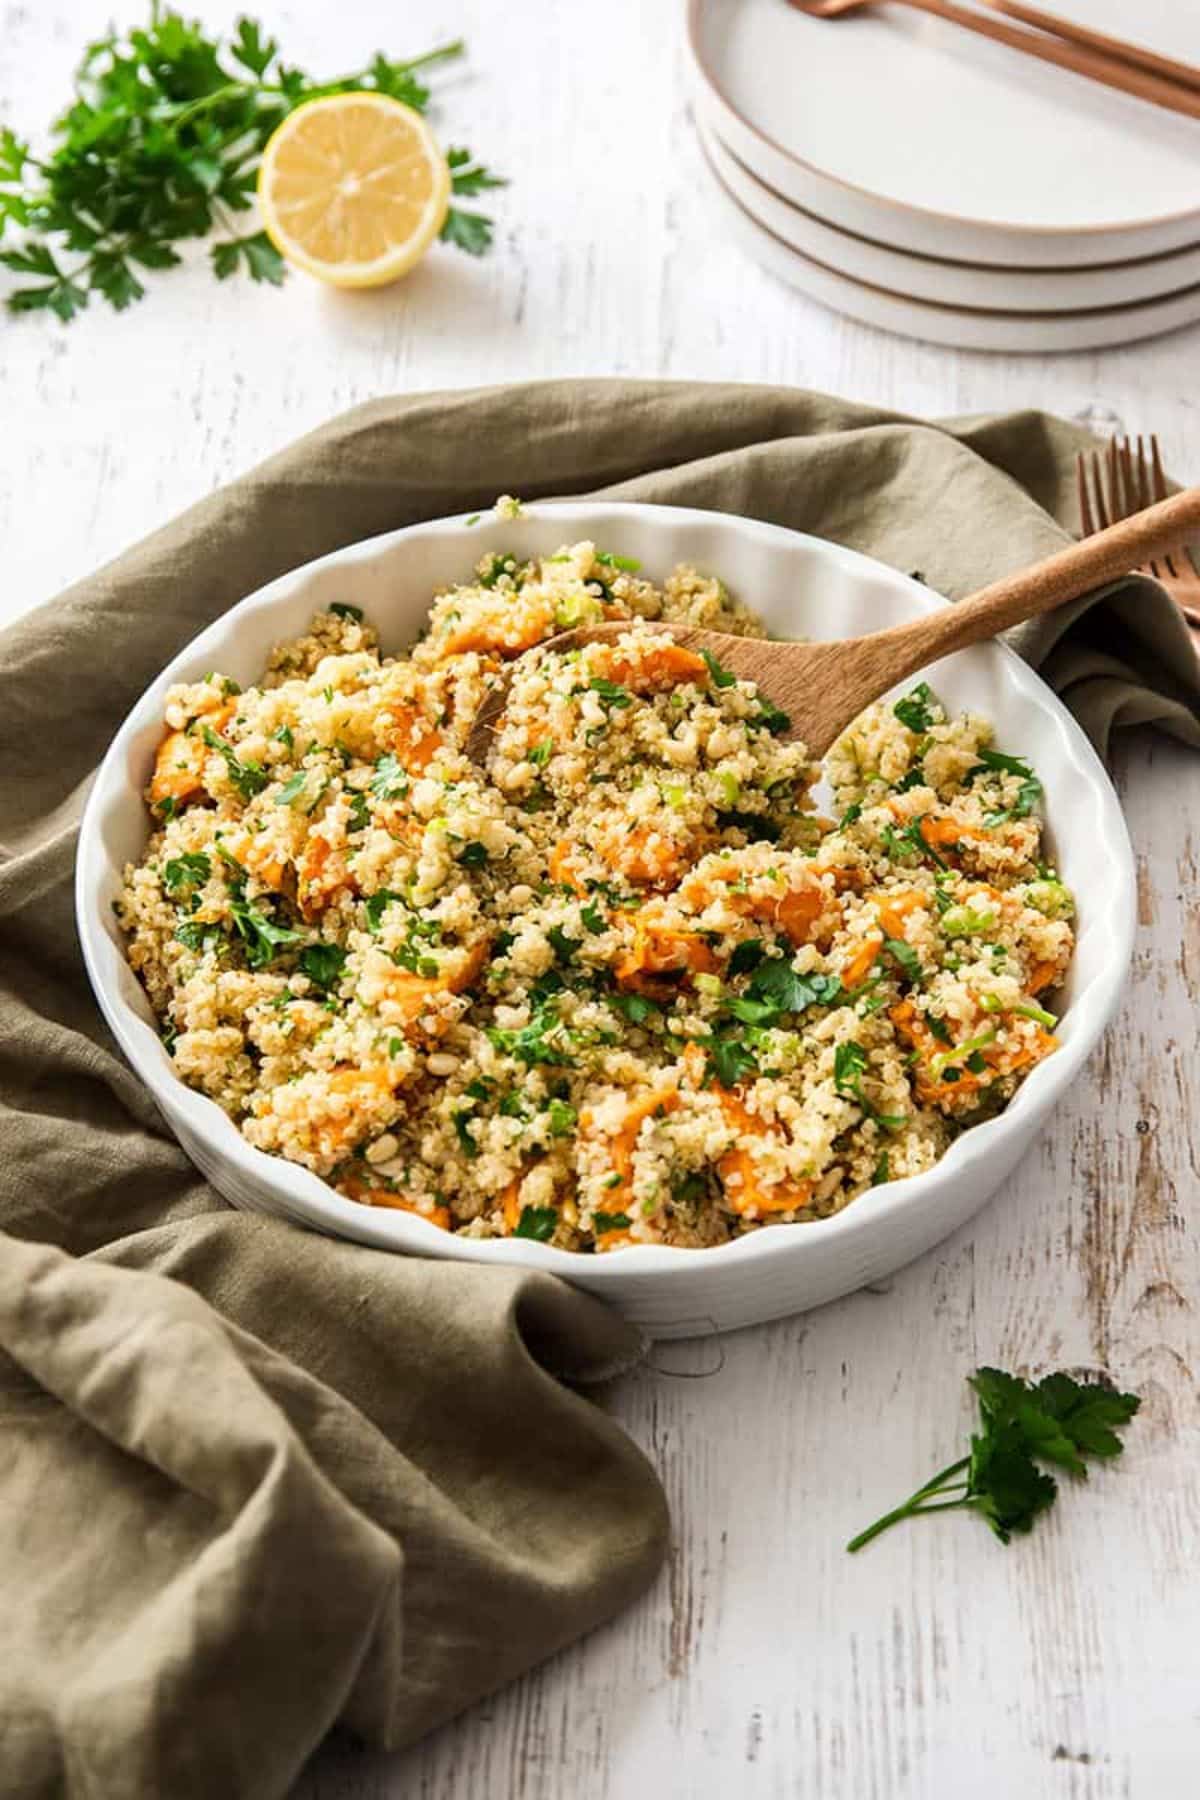 Healthy Sweet Potato Quinoa Salad in a white bowl with a wooden spoon.